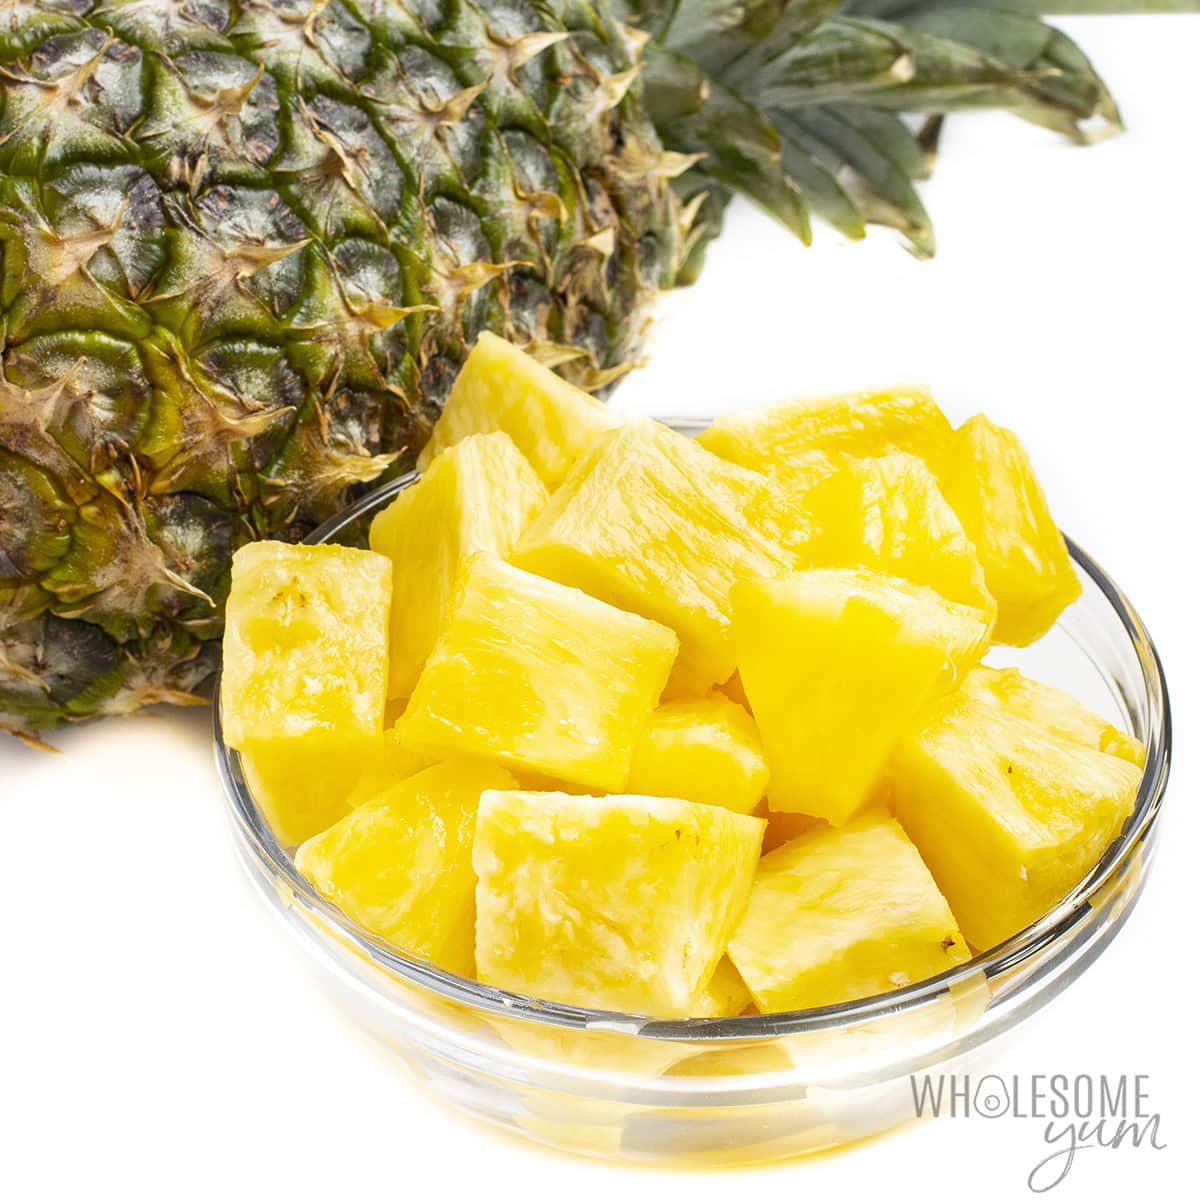 Carbs in pineapple shown here in a bowl are very high, unfortunately.